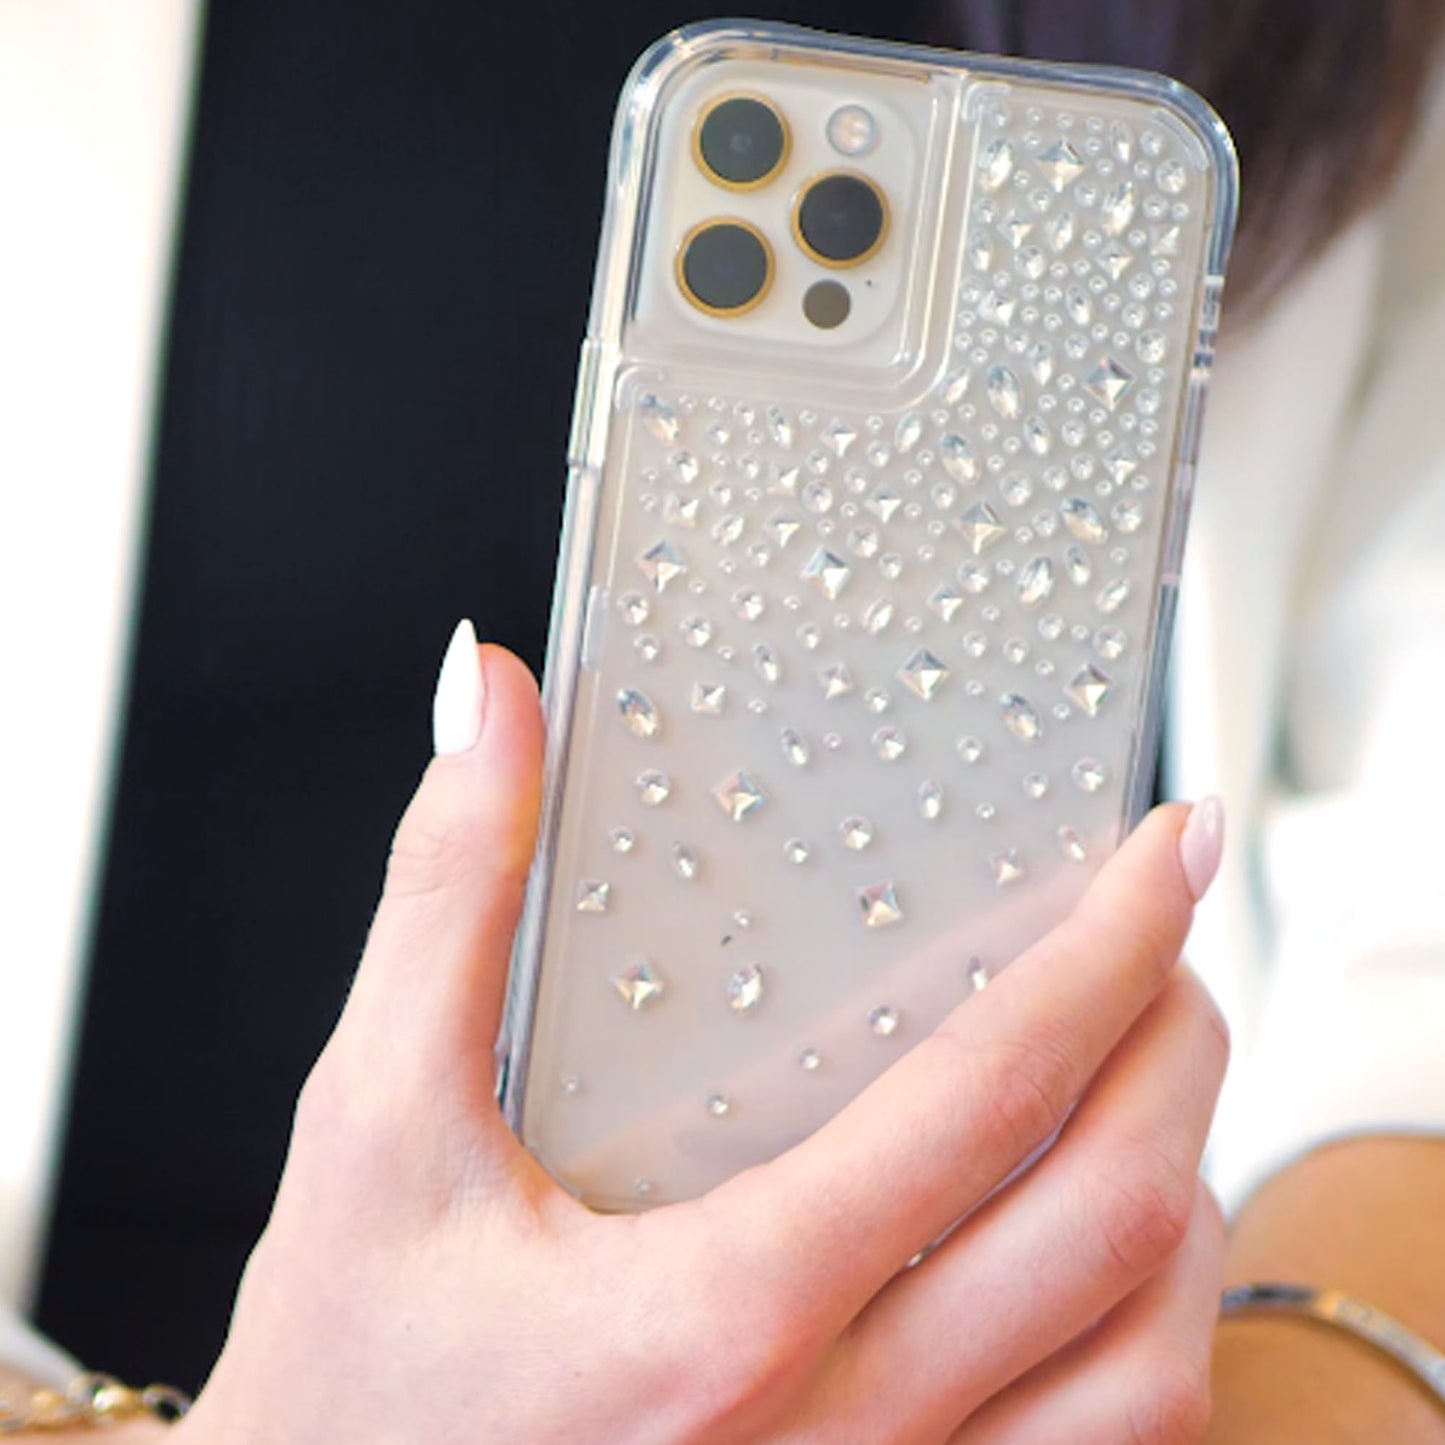 Case-Mate Karat Crystal for iPhone 13 Pro Max 6.7" 5G with Antimicrobial  (Barcode: 840171706253 )